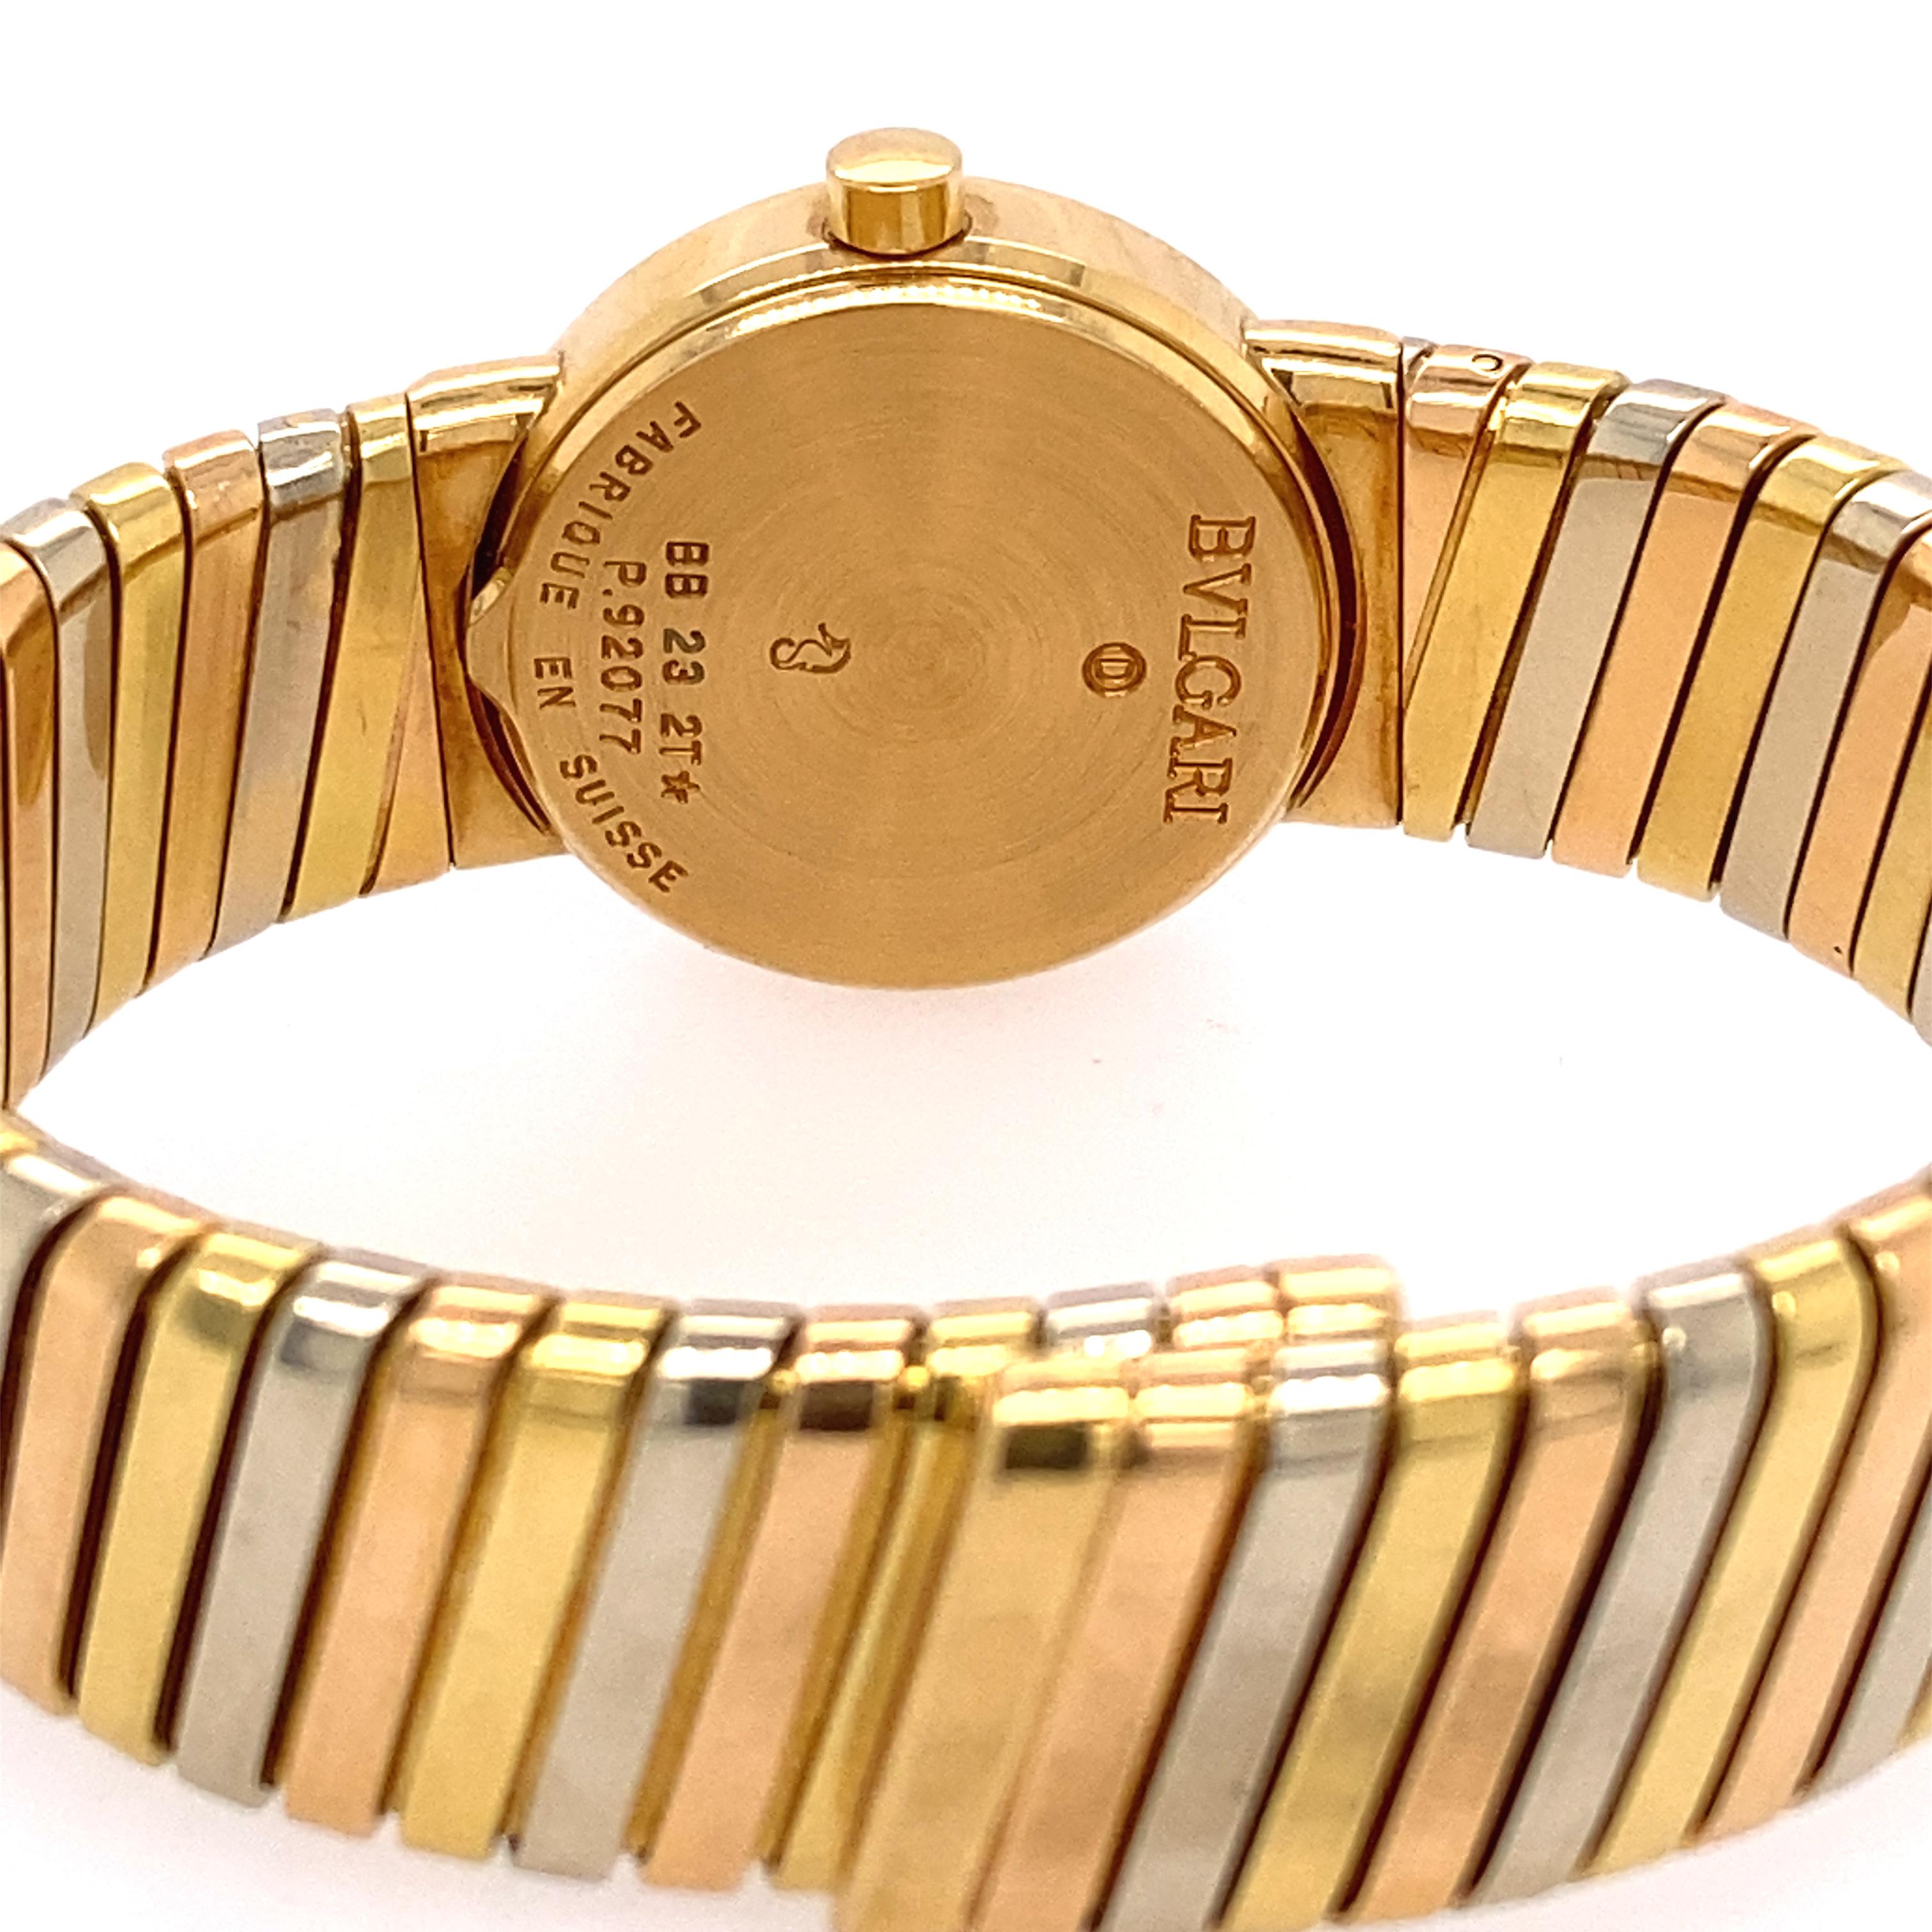 Tri-color 18k Gold 'Tubogas' Bvlgari Bracelet watch. Total weight 52.0. dwt 
Measurement of Bracelet wrist is 7 inches, 14.53 mm wide.



Please note that it is not guaranteed for the watch to be keeping time.